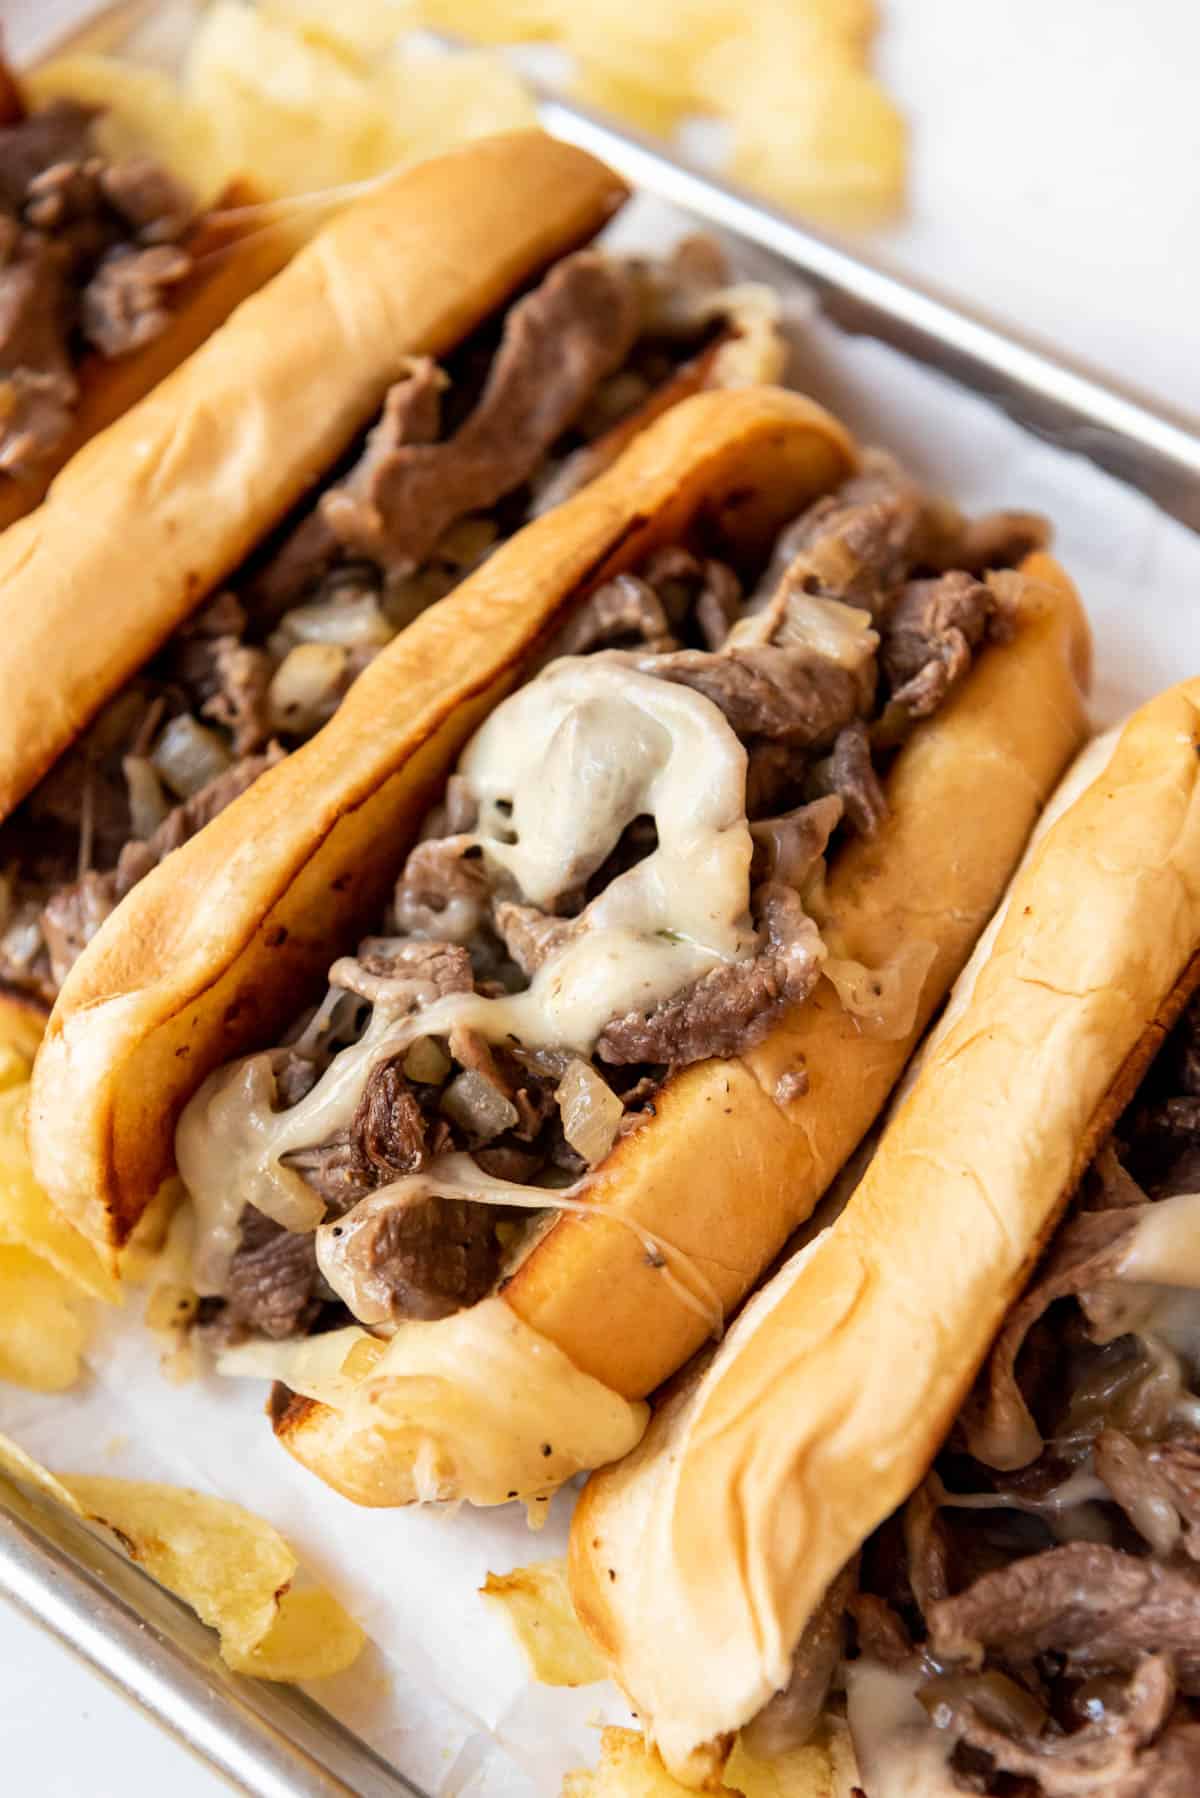 Soft hoagie rolls filled with Philly cheese steak filling.